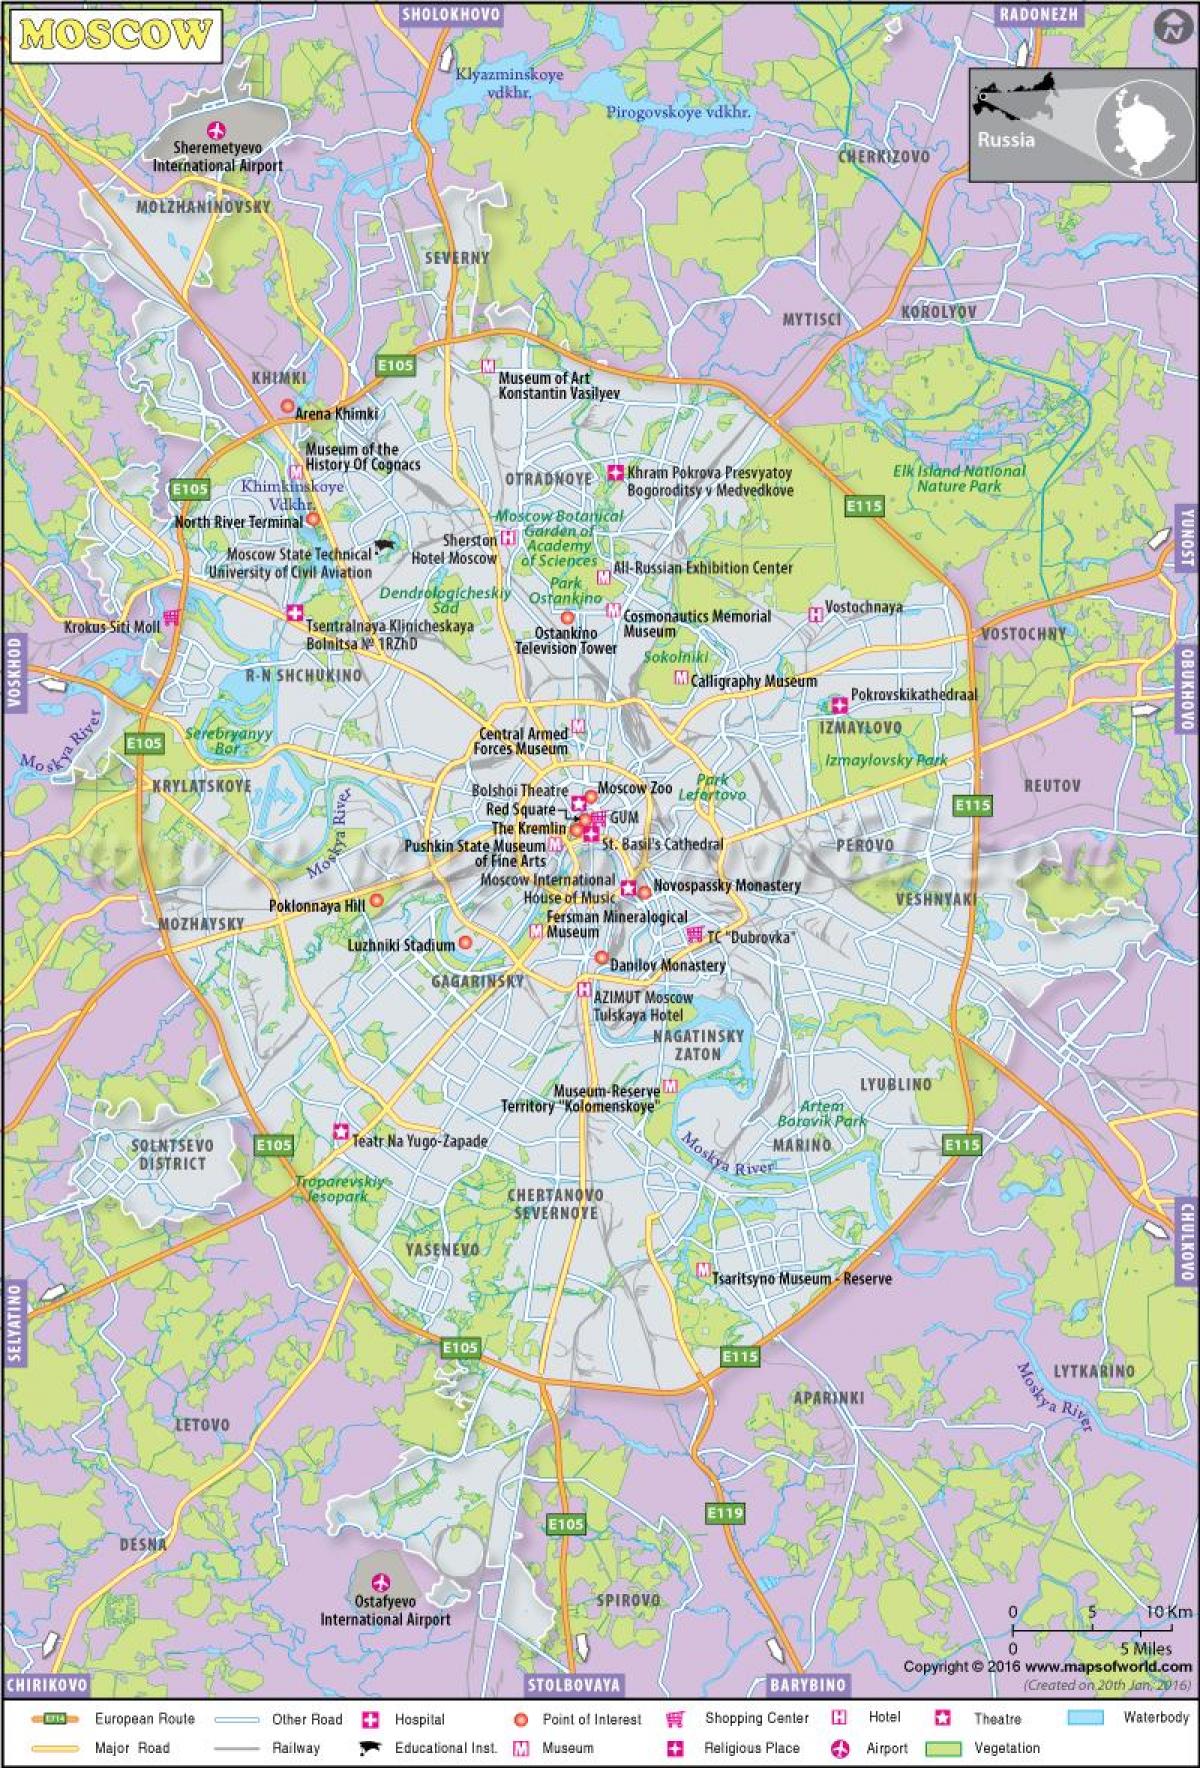 Moscow on a map